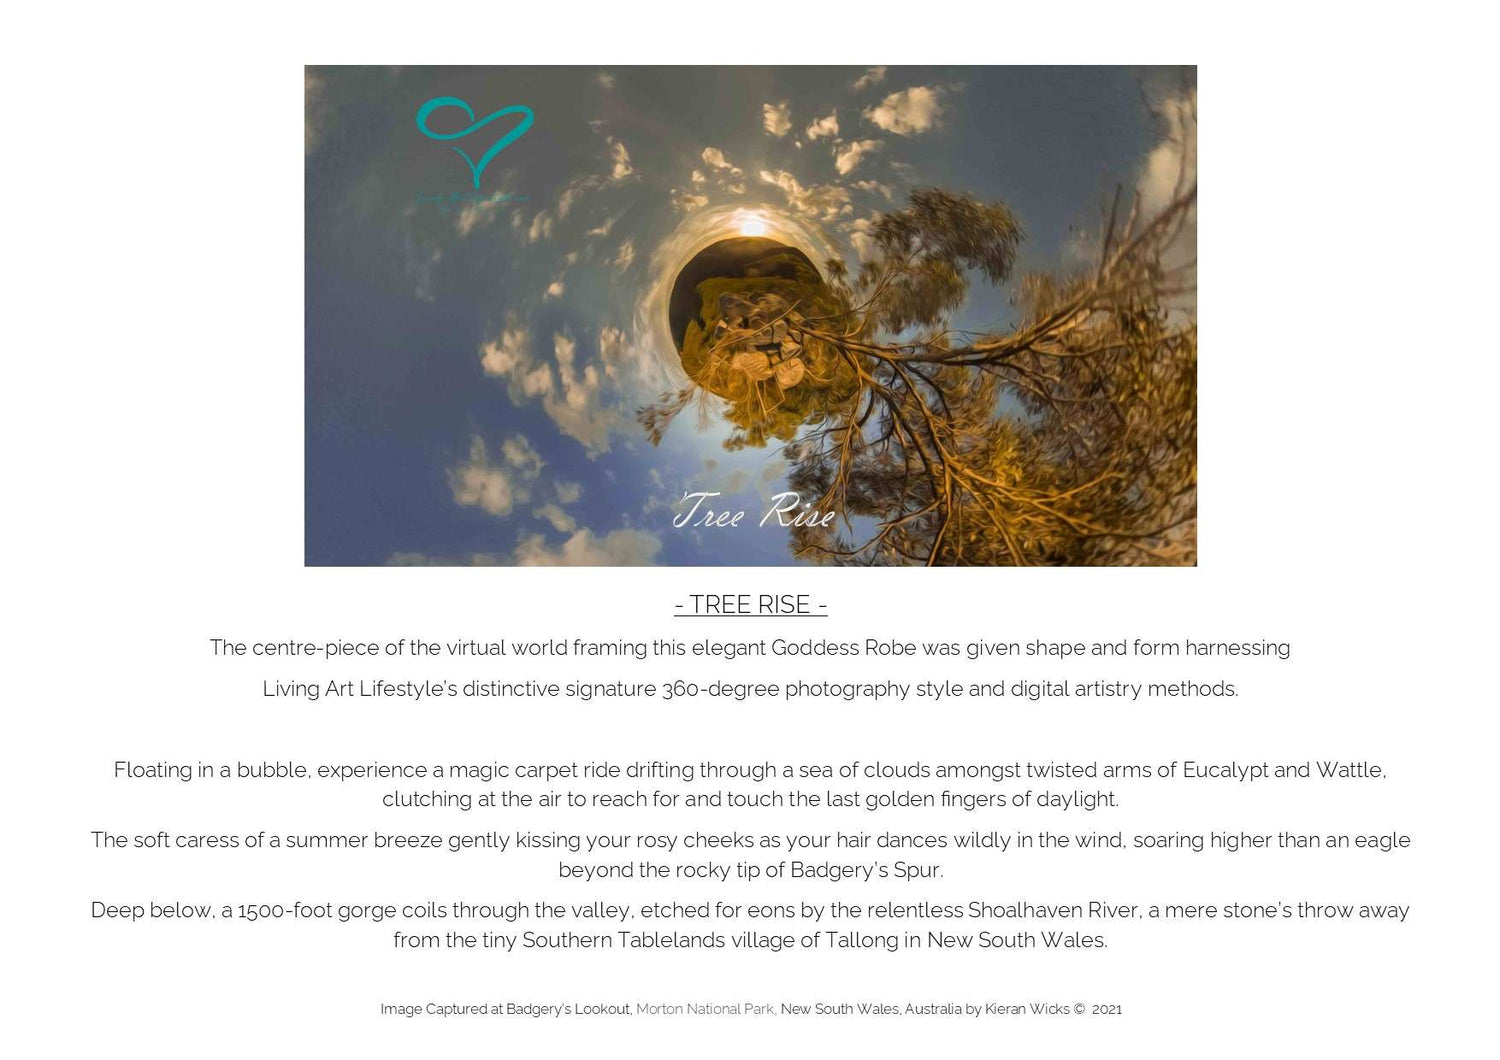 TREE RISE DESIGN COLLECTION - LIVING ART LIFESTYLE - DESIGN STORY BACKGROUND DIGITAL ART - BADGERRYS LOOKOUT - SOUTHERN TABLELANDS NEW SOUTH WALES